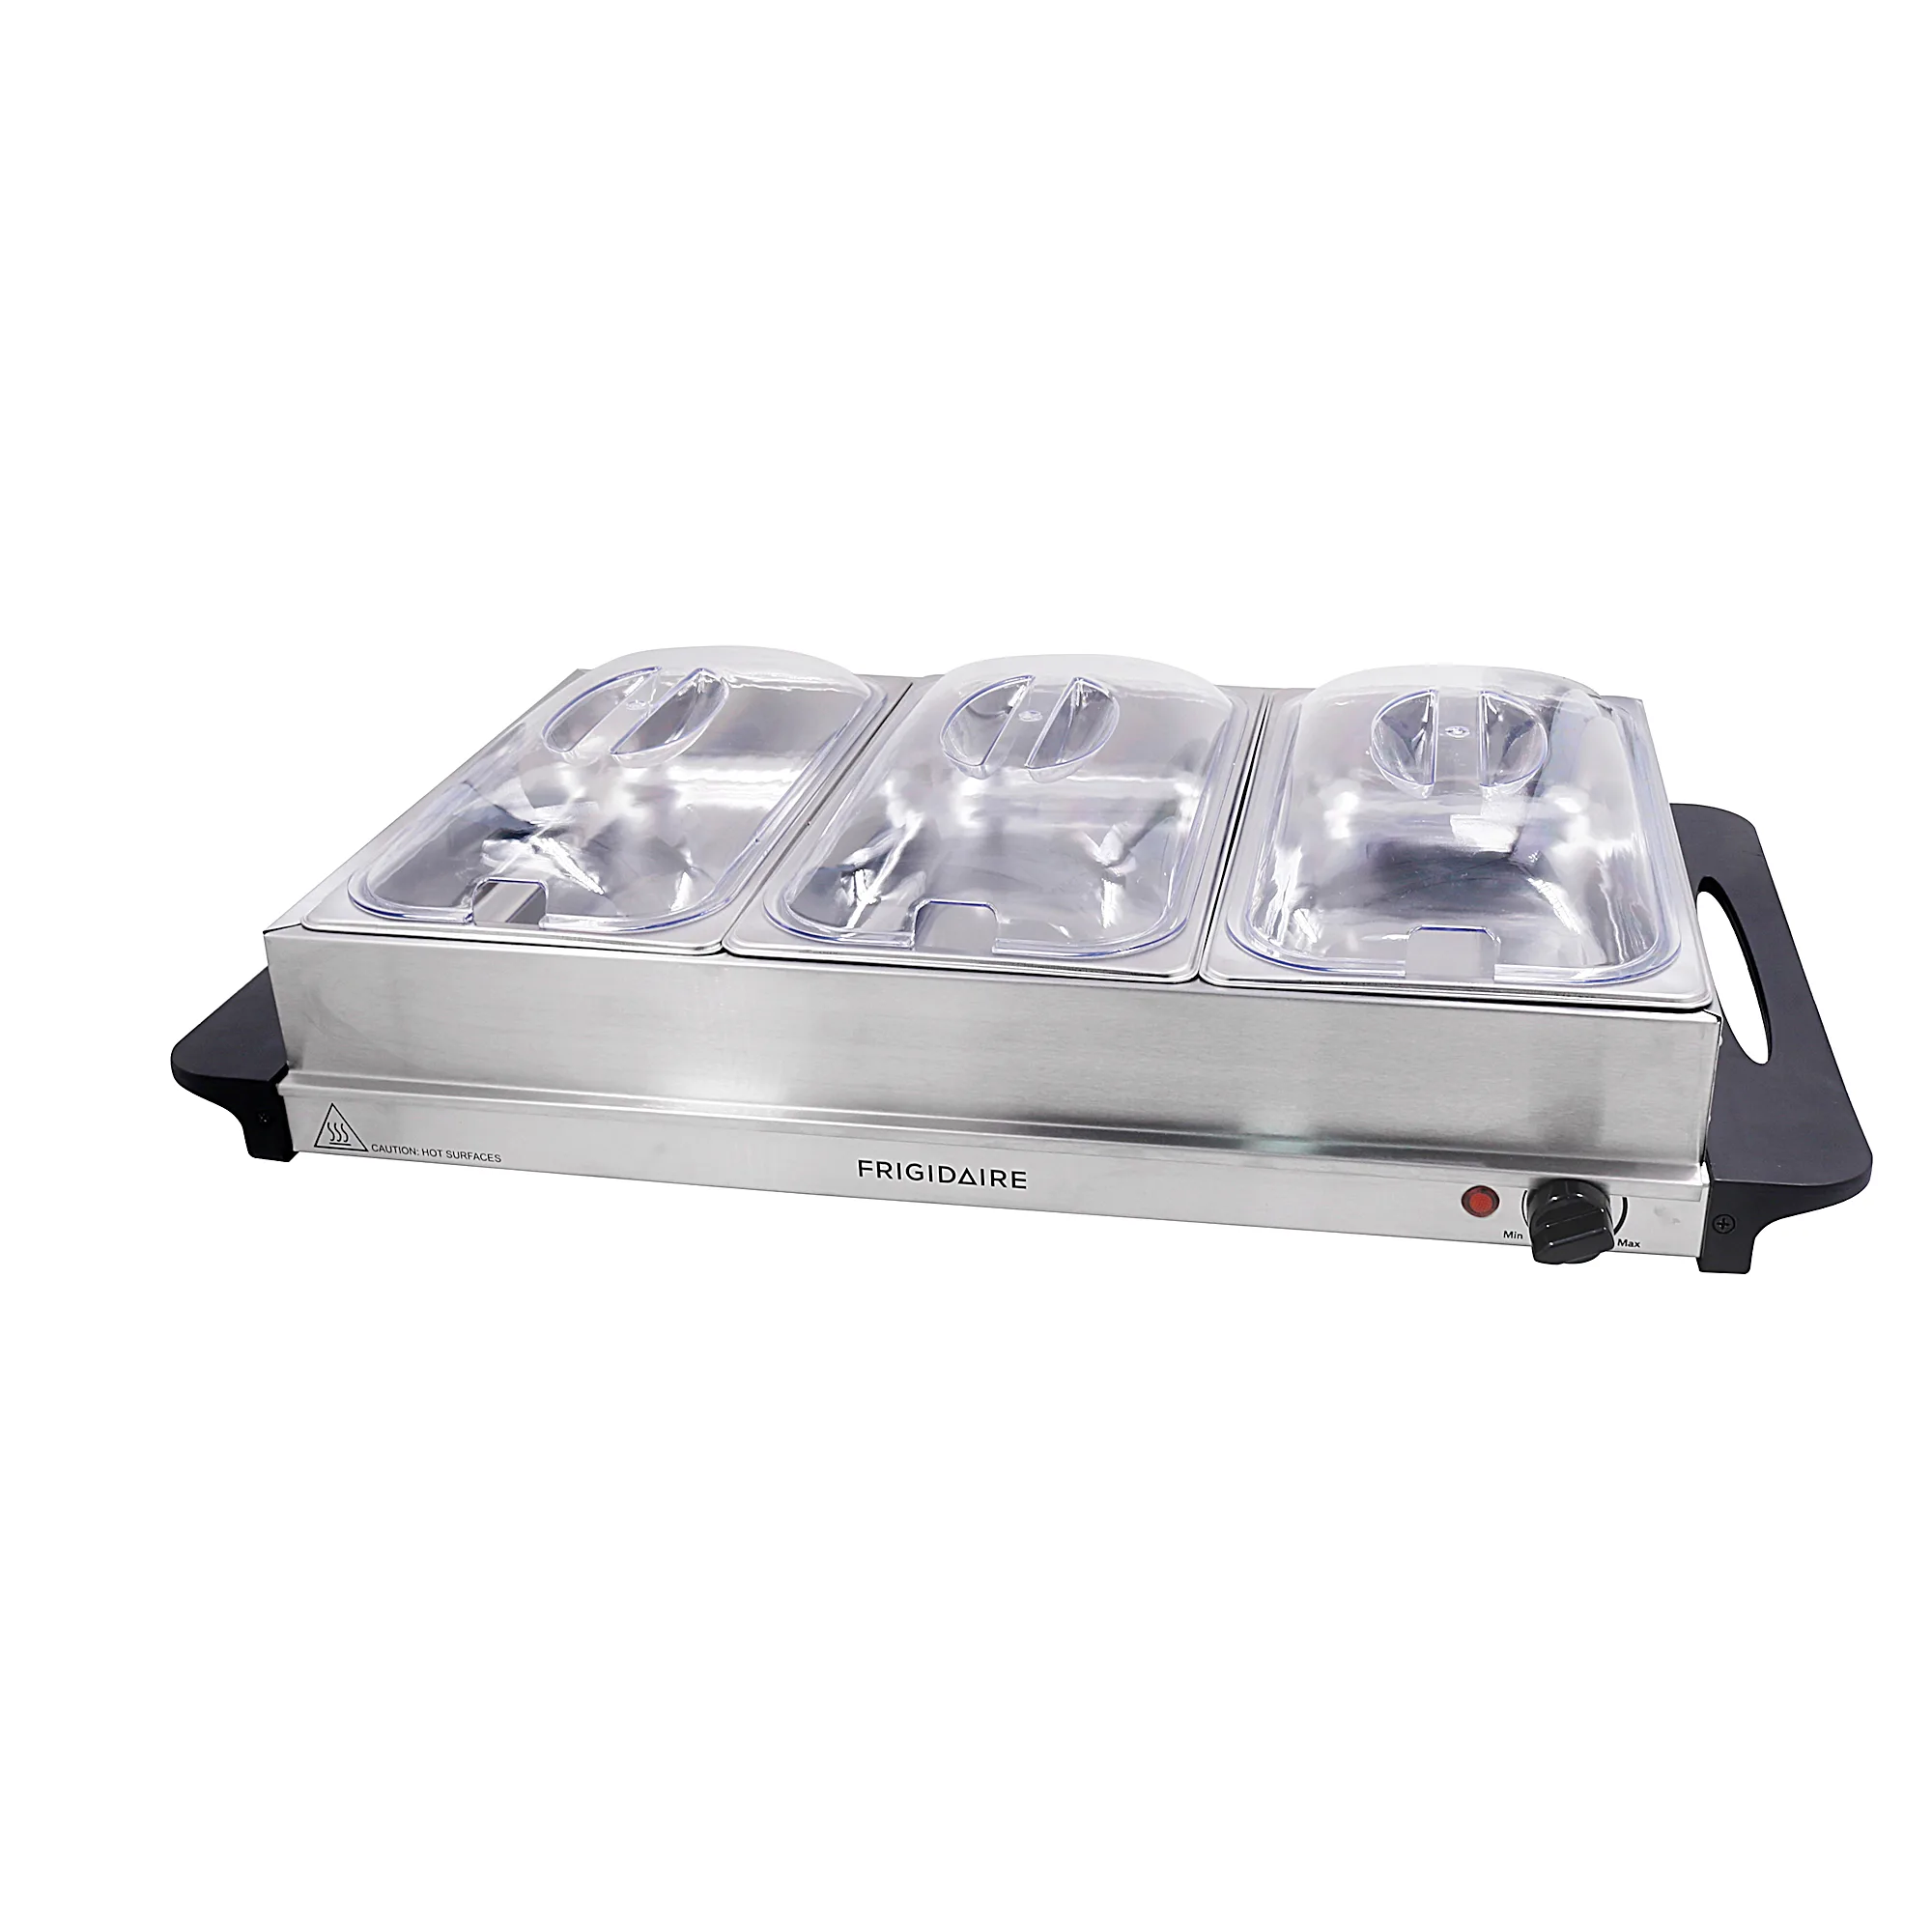 https://images-worker.bonanzastatic.com/afu/images/fda1/bc93/06d6_13532044850/FRIGIDAIRE_3-Tier_Stainless_Steel_Buffet_Server_Food_Warmer_with_Warming_Tray_5_thumb200.jpg